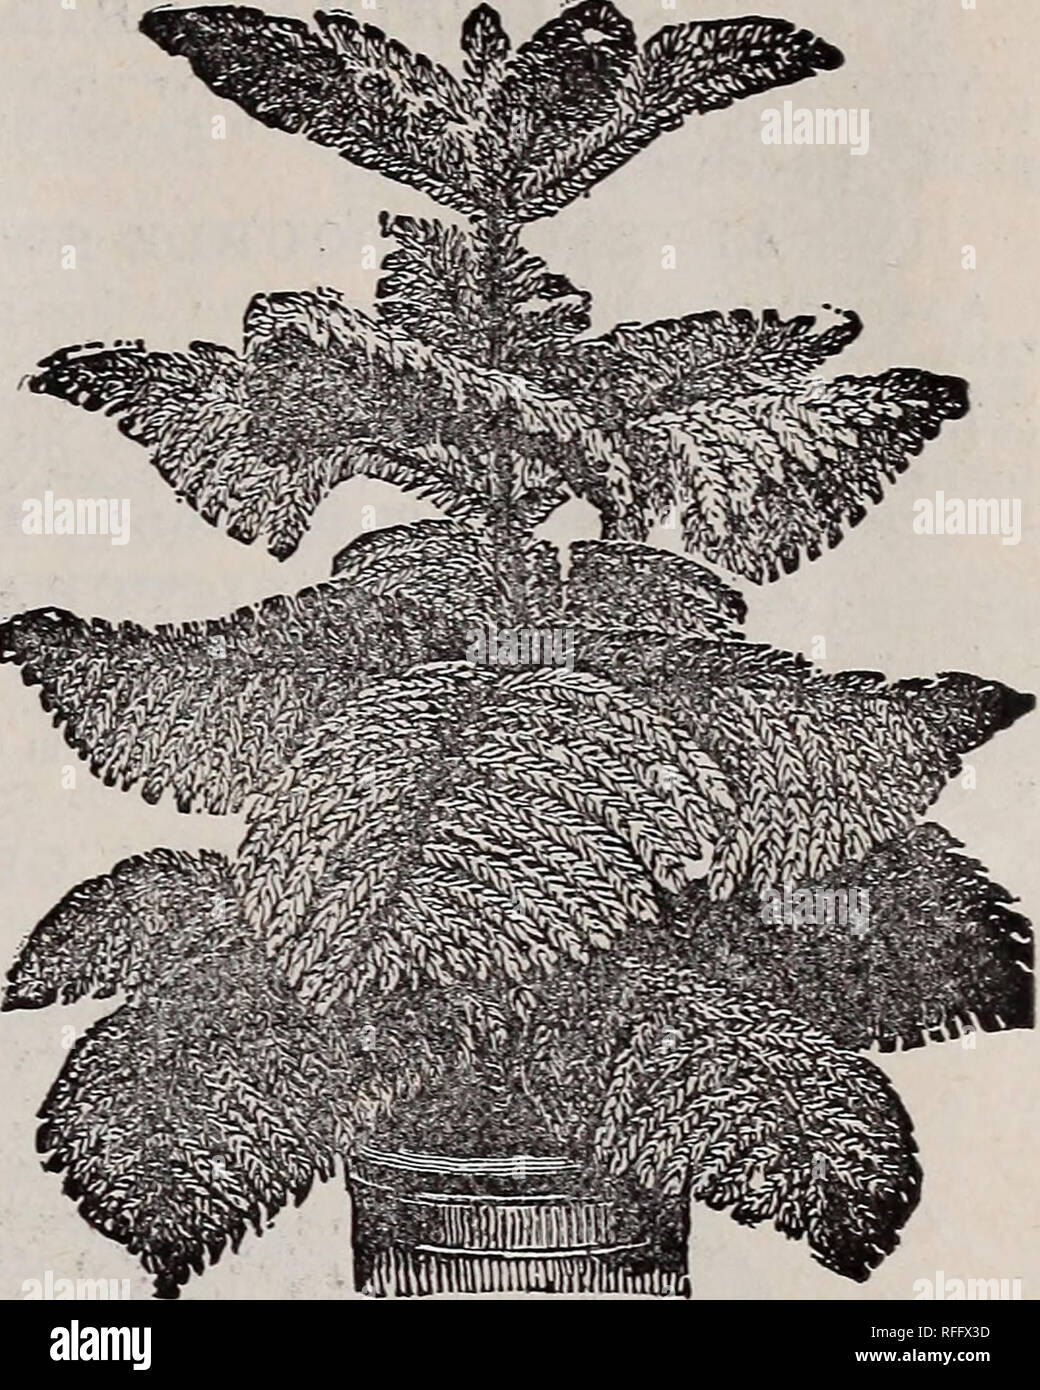 . The Champion City Greenhouses trade list. Nursery stock Ohio Catalogs; Plants, Ornamental Catalogs; Roses Catalogs; Flowers Catalogs; Bulbs (Plants) Catalogs. Acalypha Sanderii.. ARAUCARIA EXCELS A, Norfolklsland Pine. — Various names have been suggested for this grand plant to properly convey to the mind the appear- ance of it. Some have called it the &quot;Christmas Tree Palm,&quot; from its resemb- lance to a Christ- mas tree; others have called itthe &quot;Star Palm,&quot; because the leaves are ar- ranged to form a perfect star, but n o descriptive name can give an adequate idea of its  Stock Photo